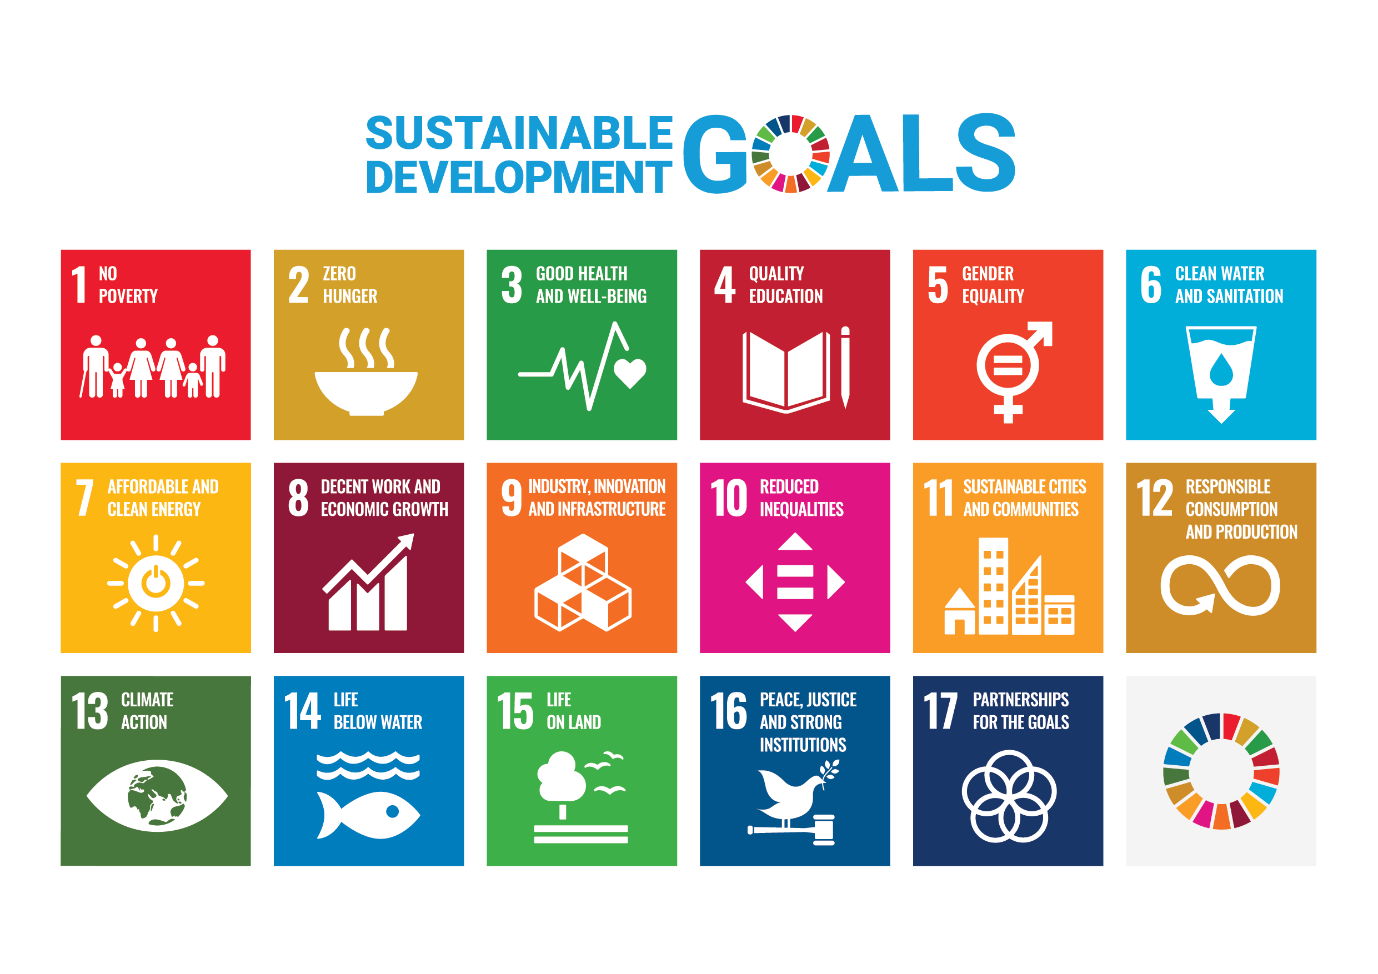 Overview of the UN sustainable development goals